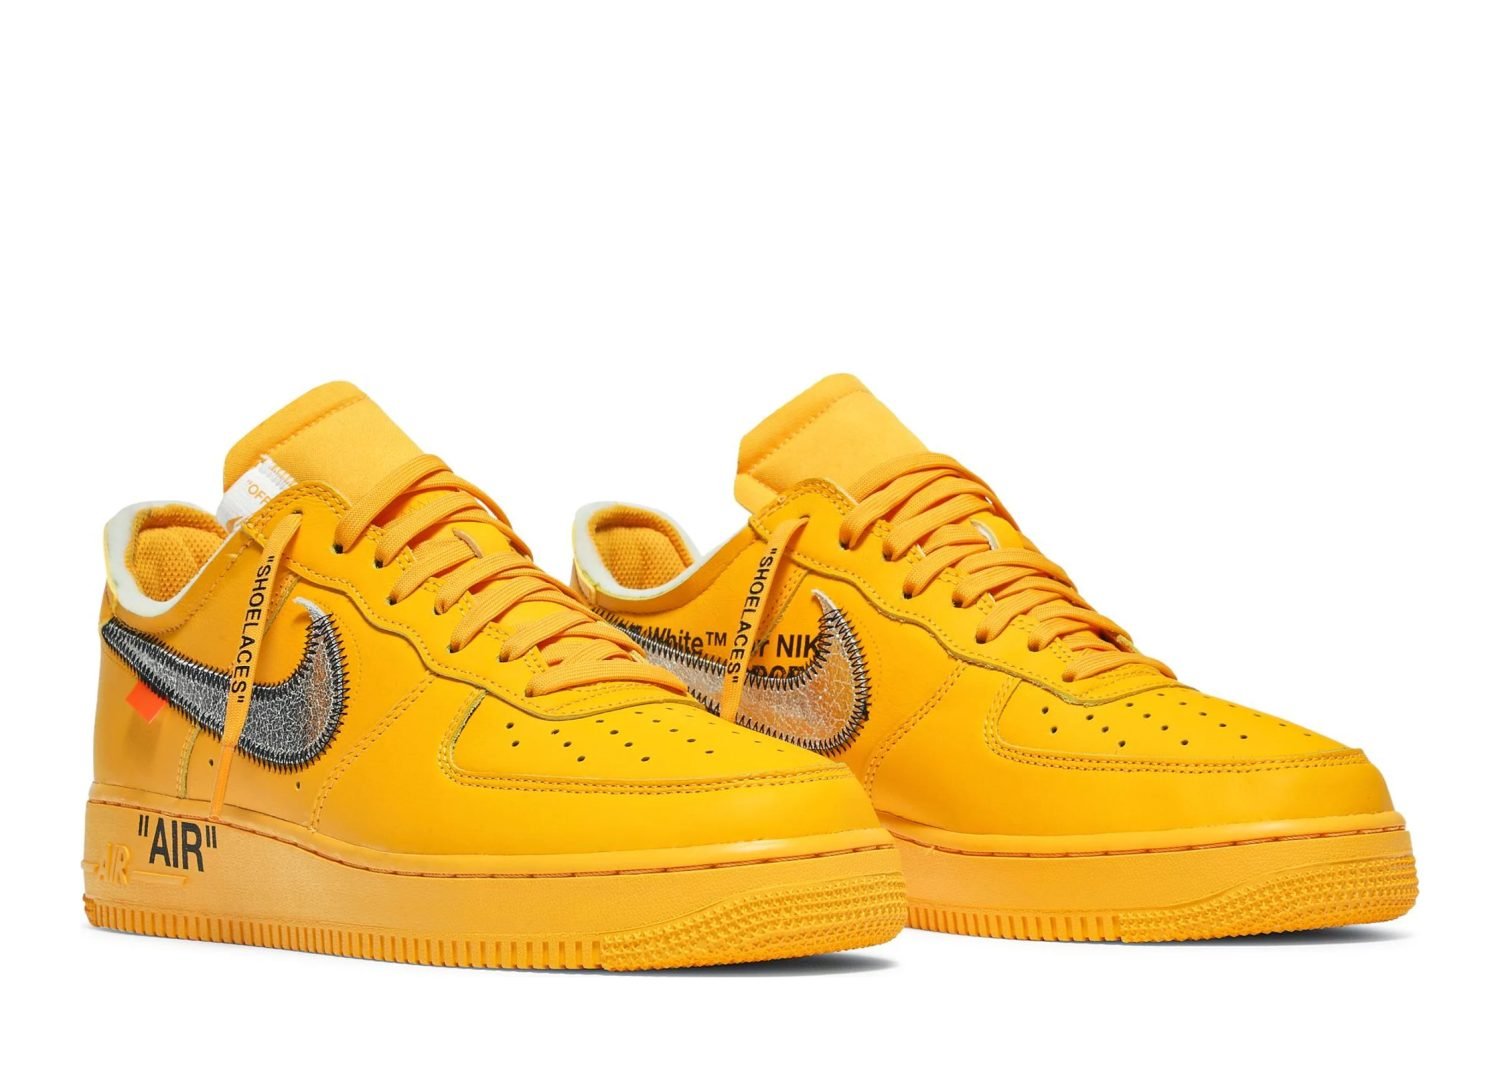 nike air force 1 low off white ica university gold5